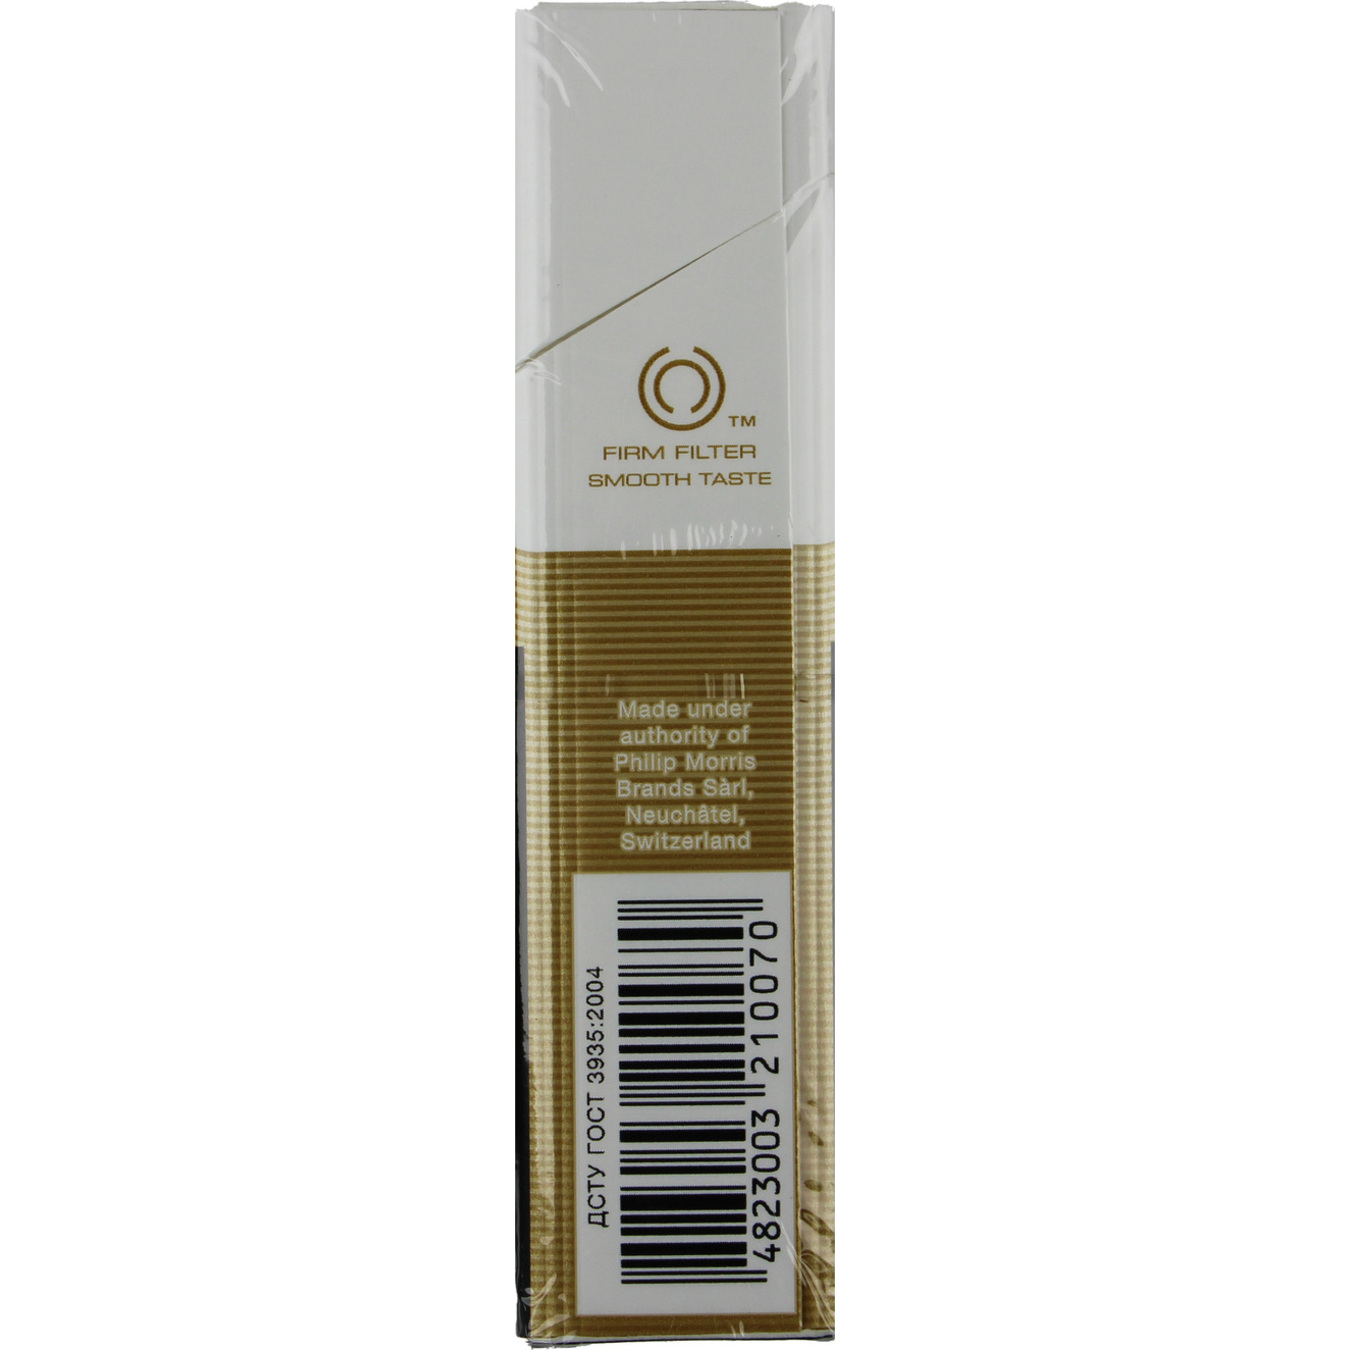 Marlboro Gold Original Cigarettes20 pcs (the price is indicated without excise tax) 2